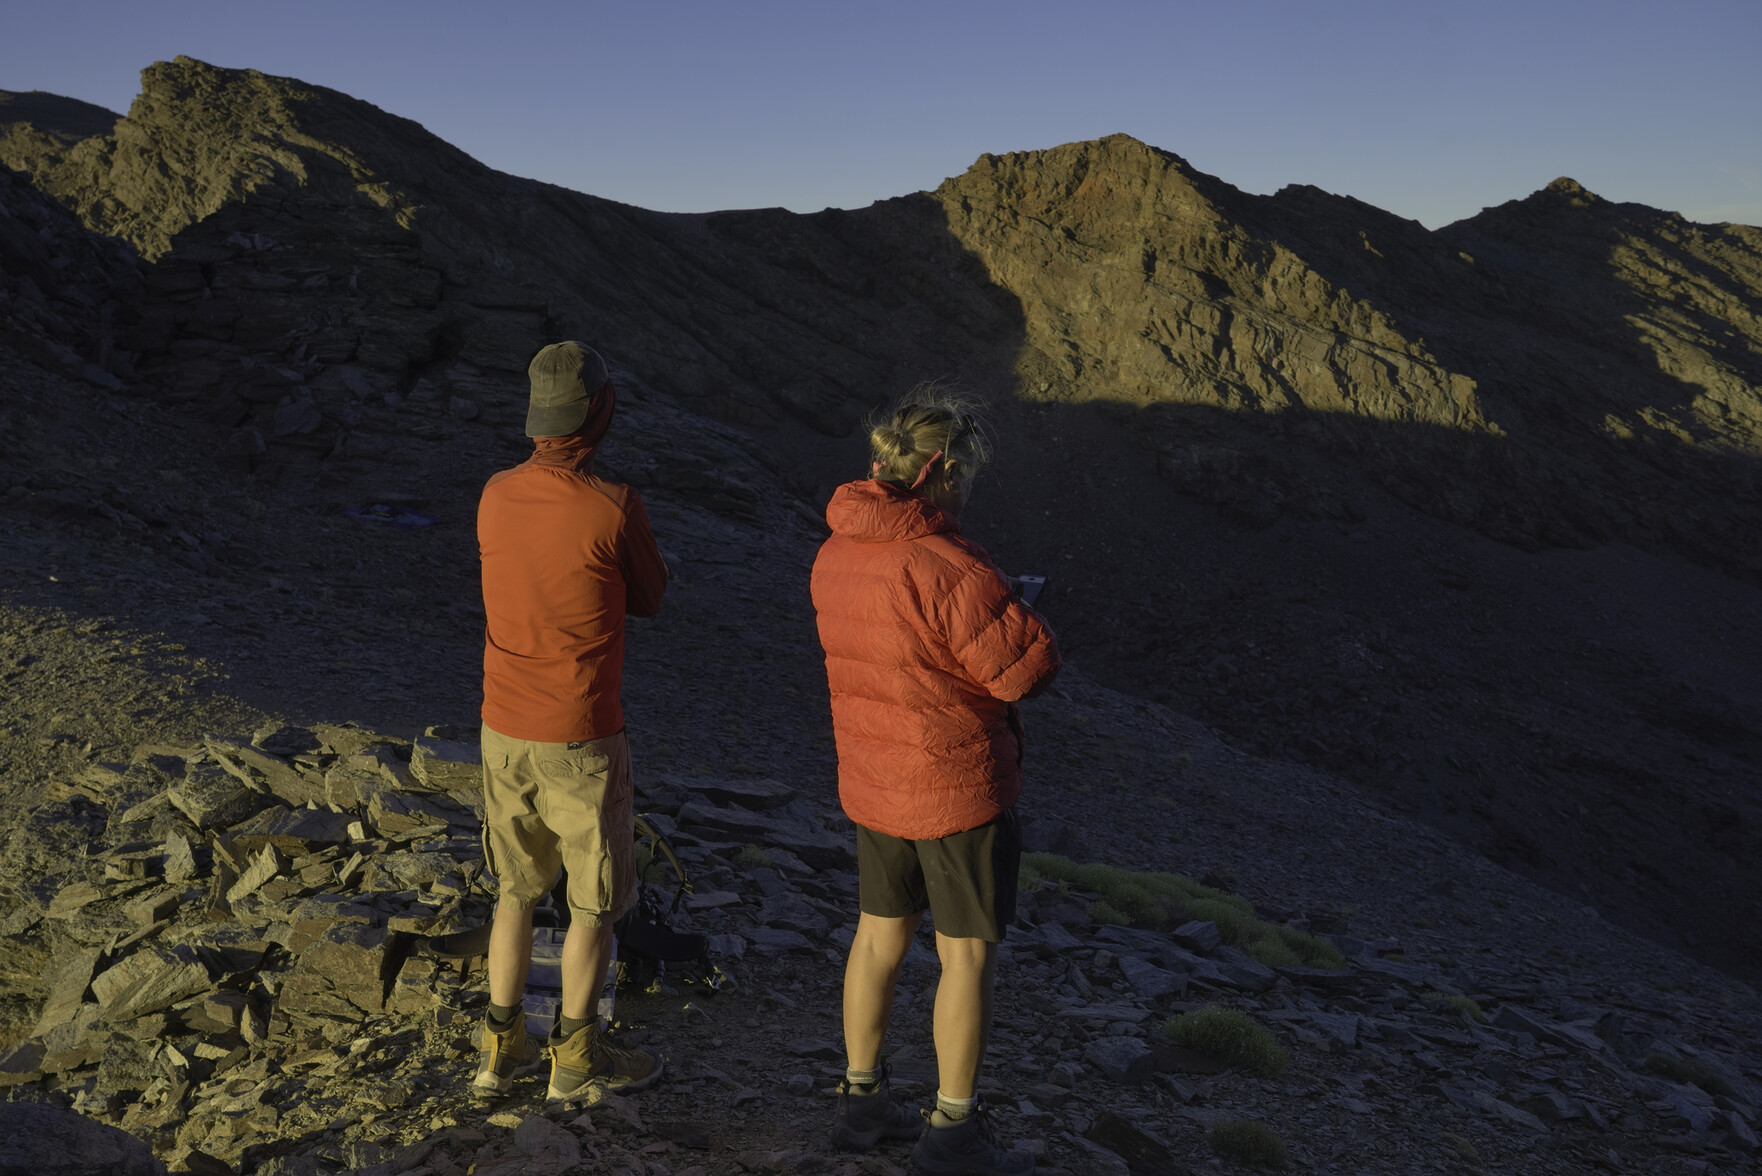 Evening sun shines on the back of two hikers and across to mountains in the background